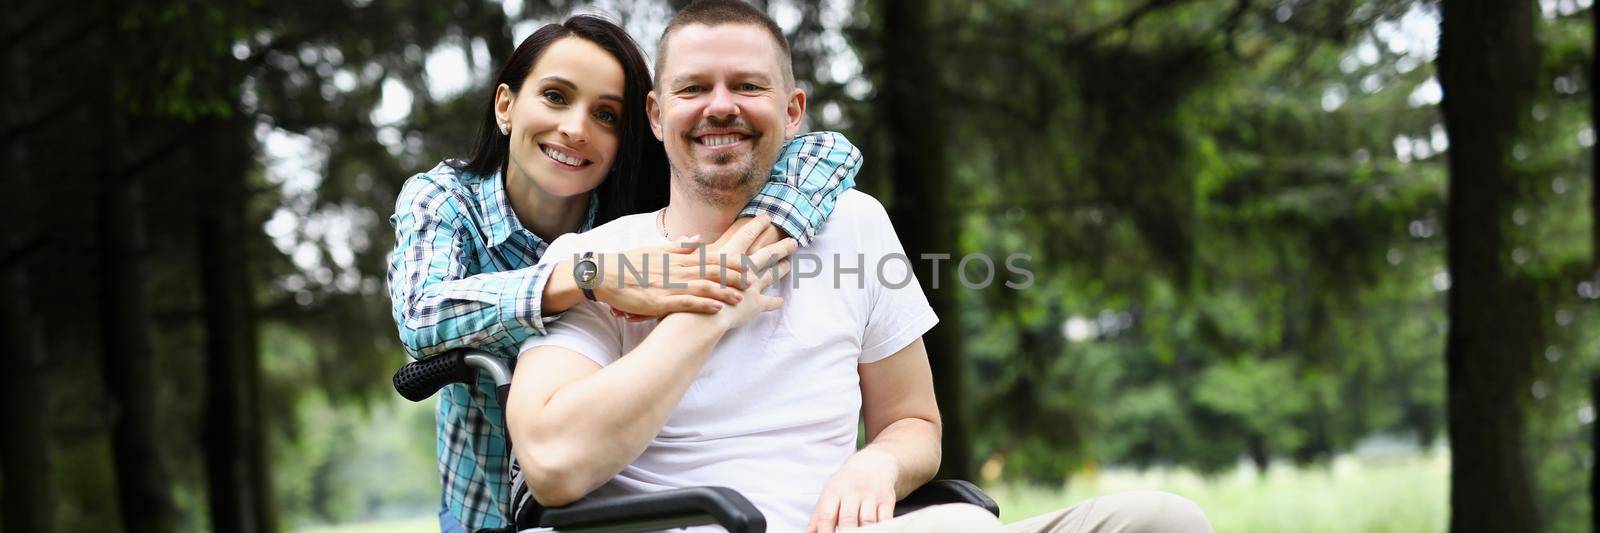 Portrait of happy couple posing in park together on fresh air. Middle aged man sitting in wheelchair, broken leg. Medicine, recovery, love, positive, family and relationship concept